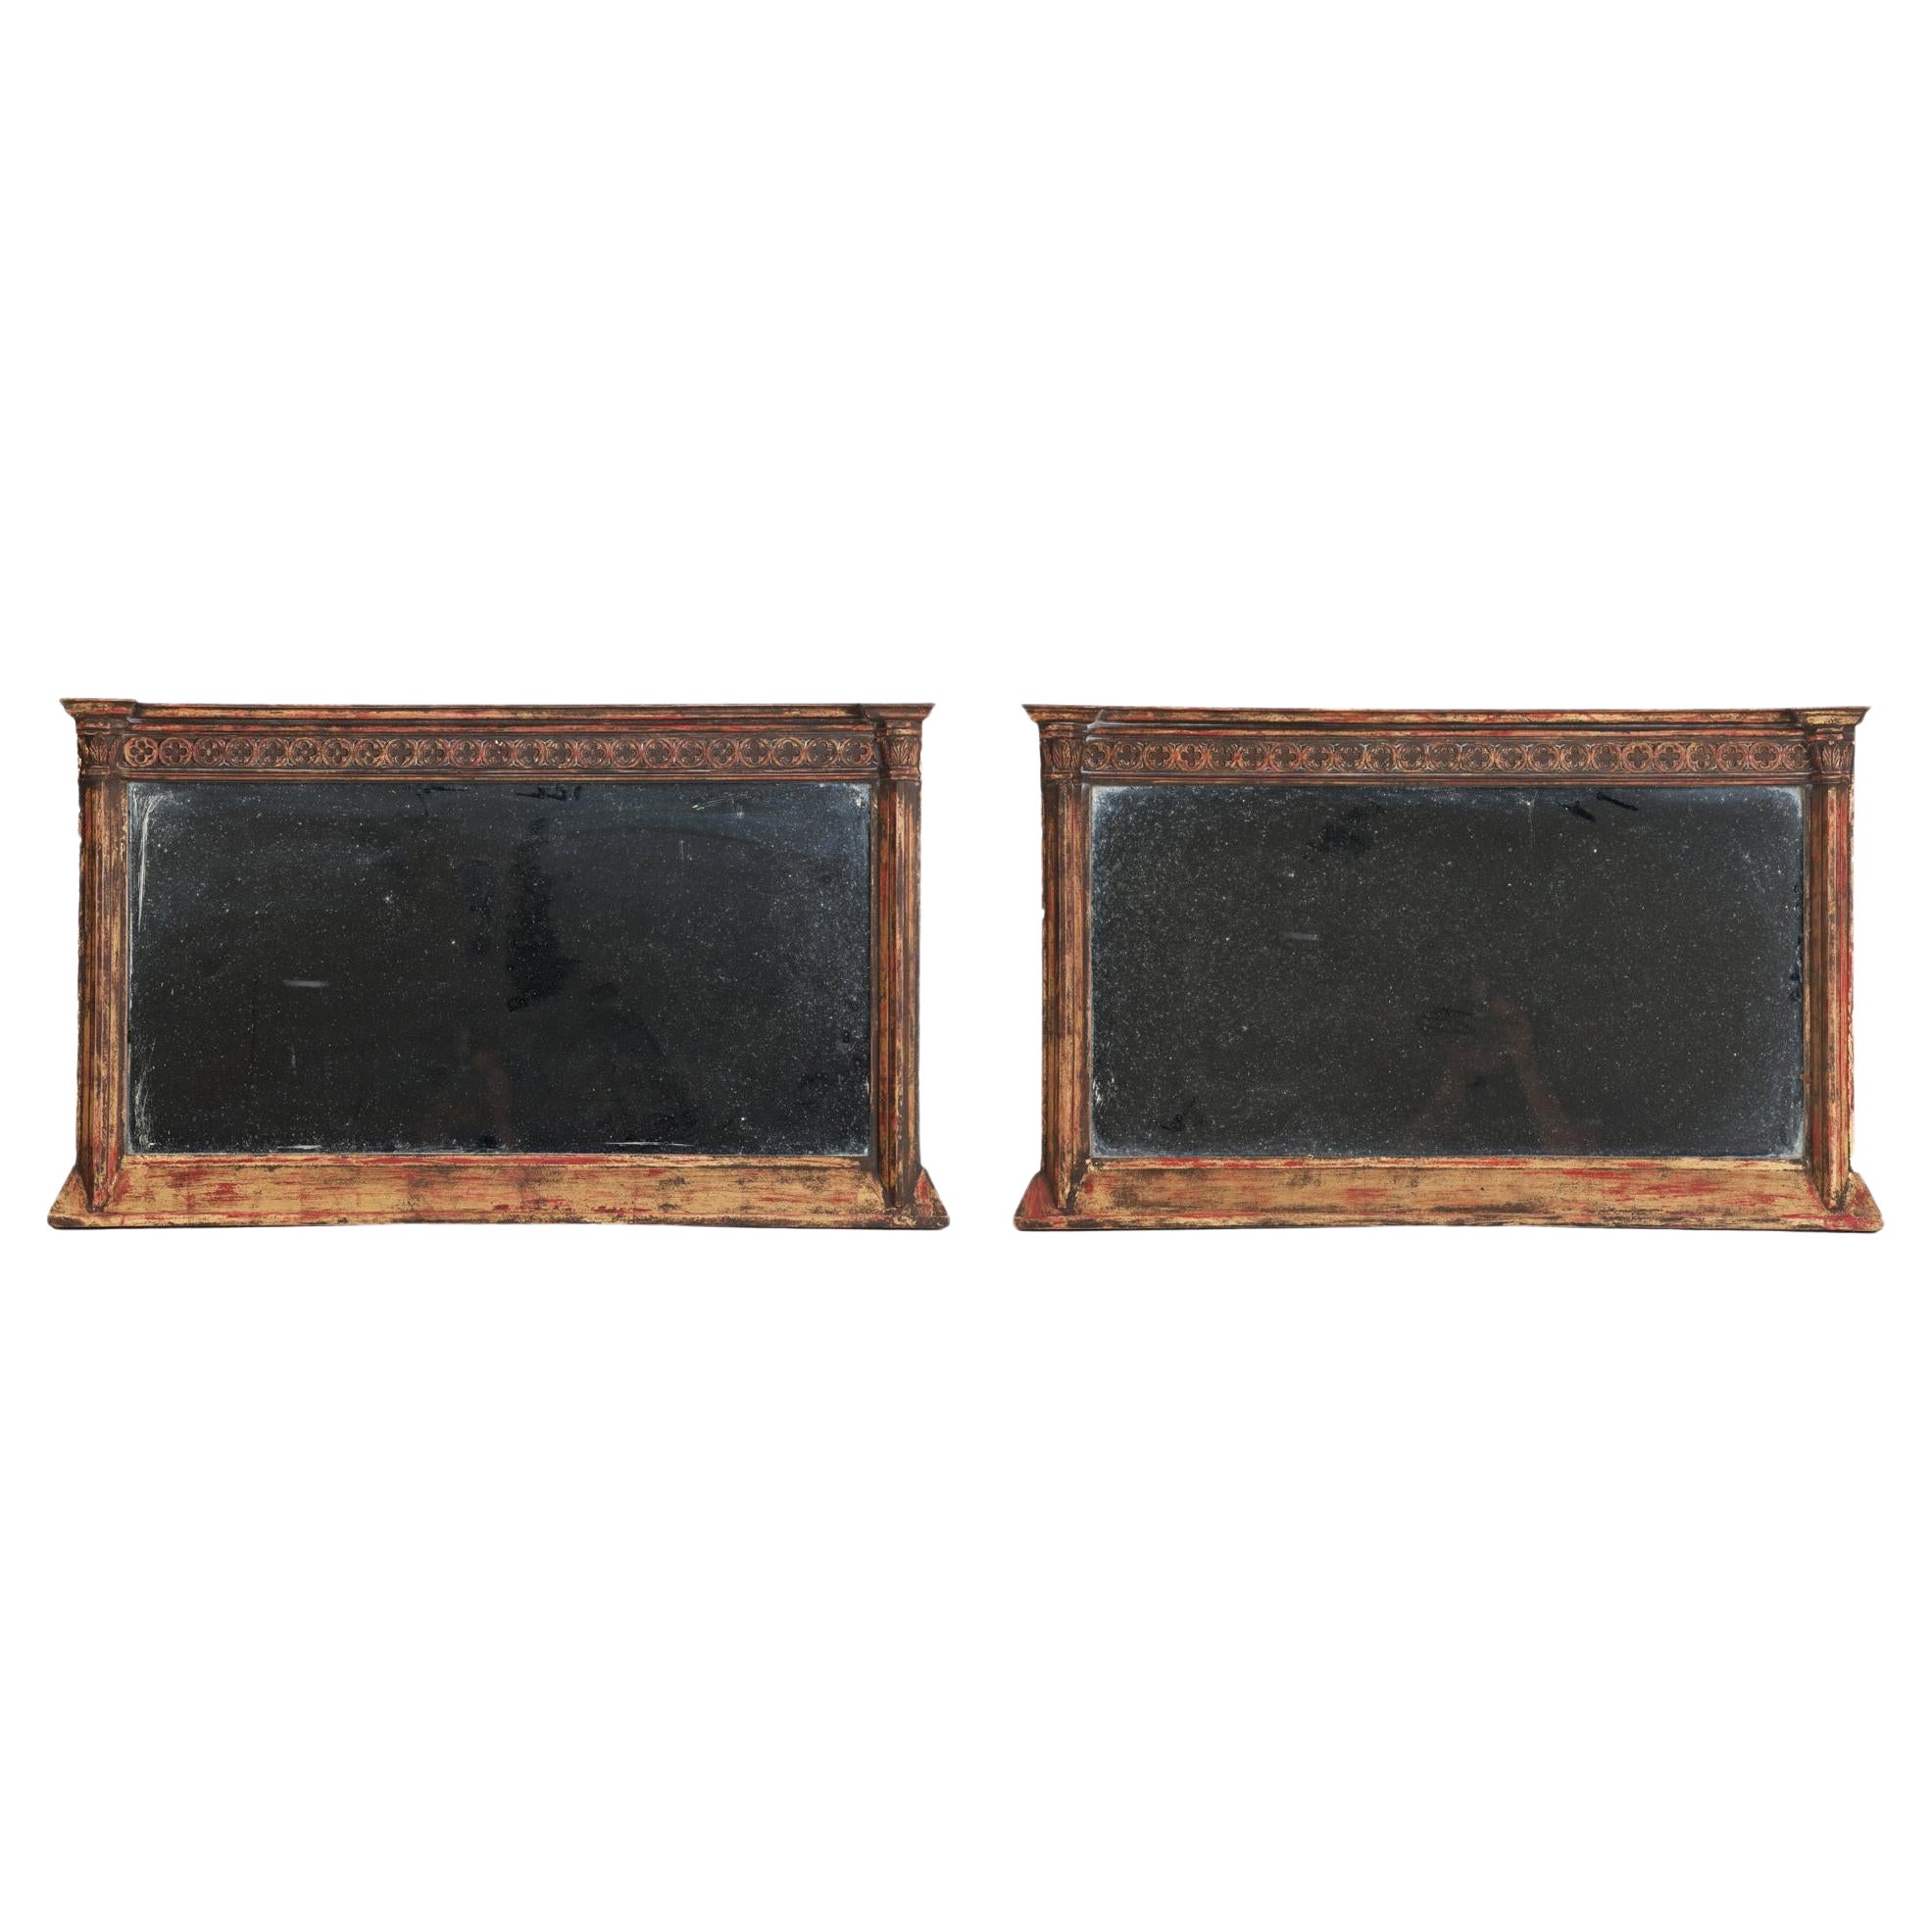 Pair of Neoclassical Style Carved Wood Trumeau, Nineteenth Century For Sale